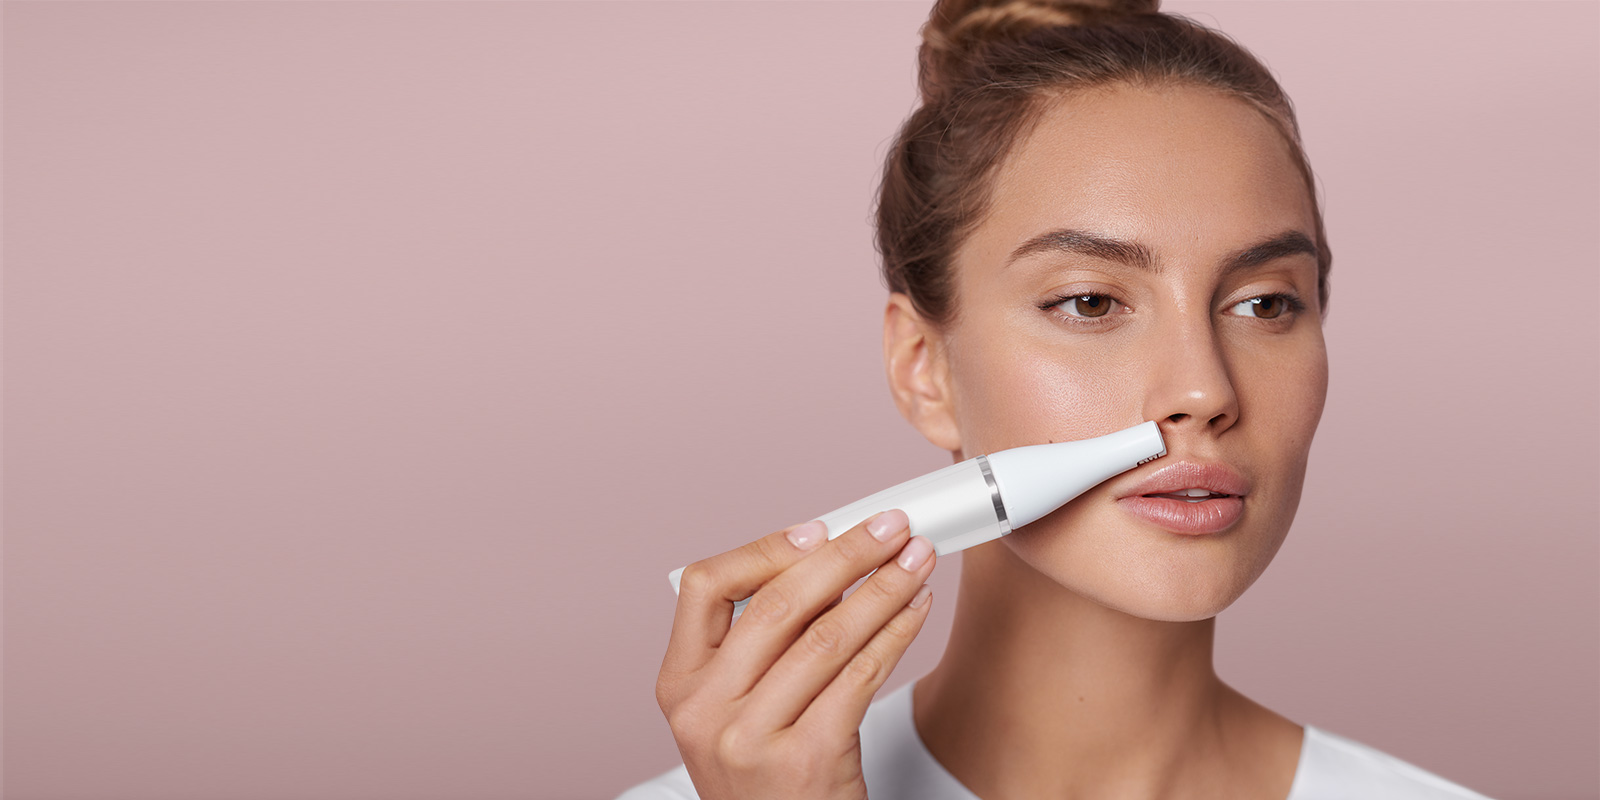 How to use a face epilator? Know its effects, uses & tips for face epilation  | Braun IN